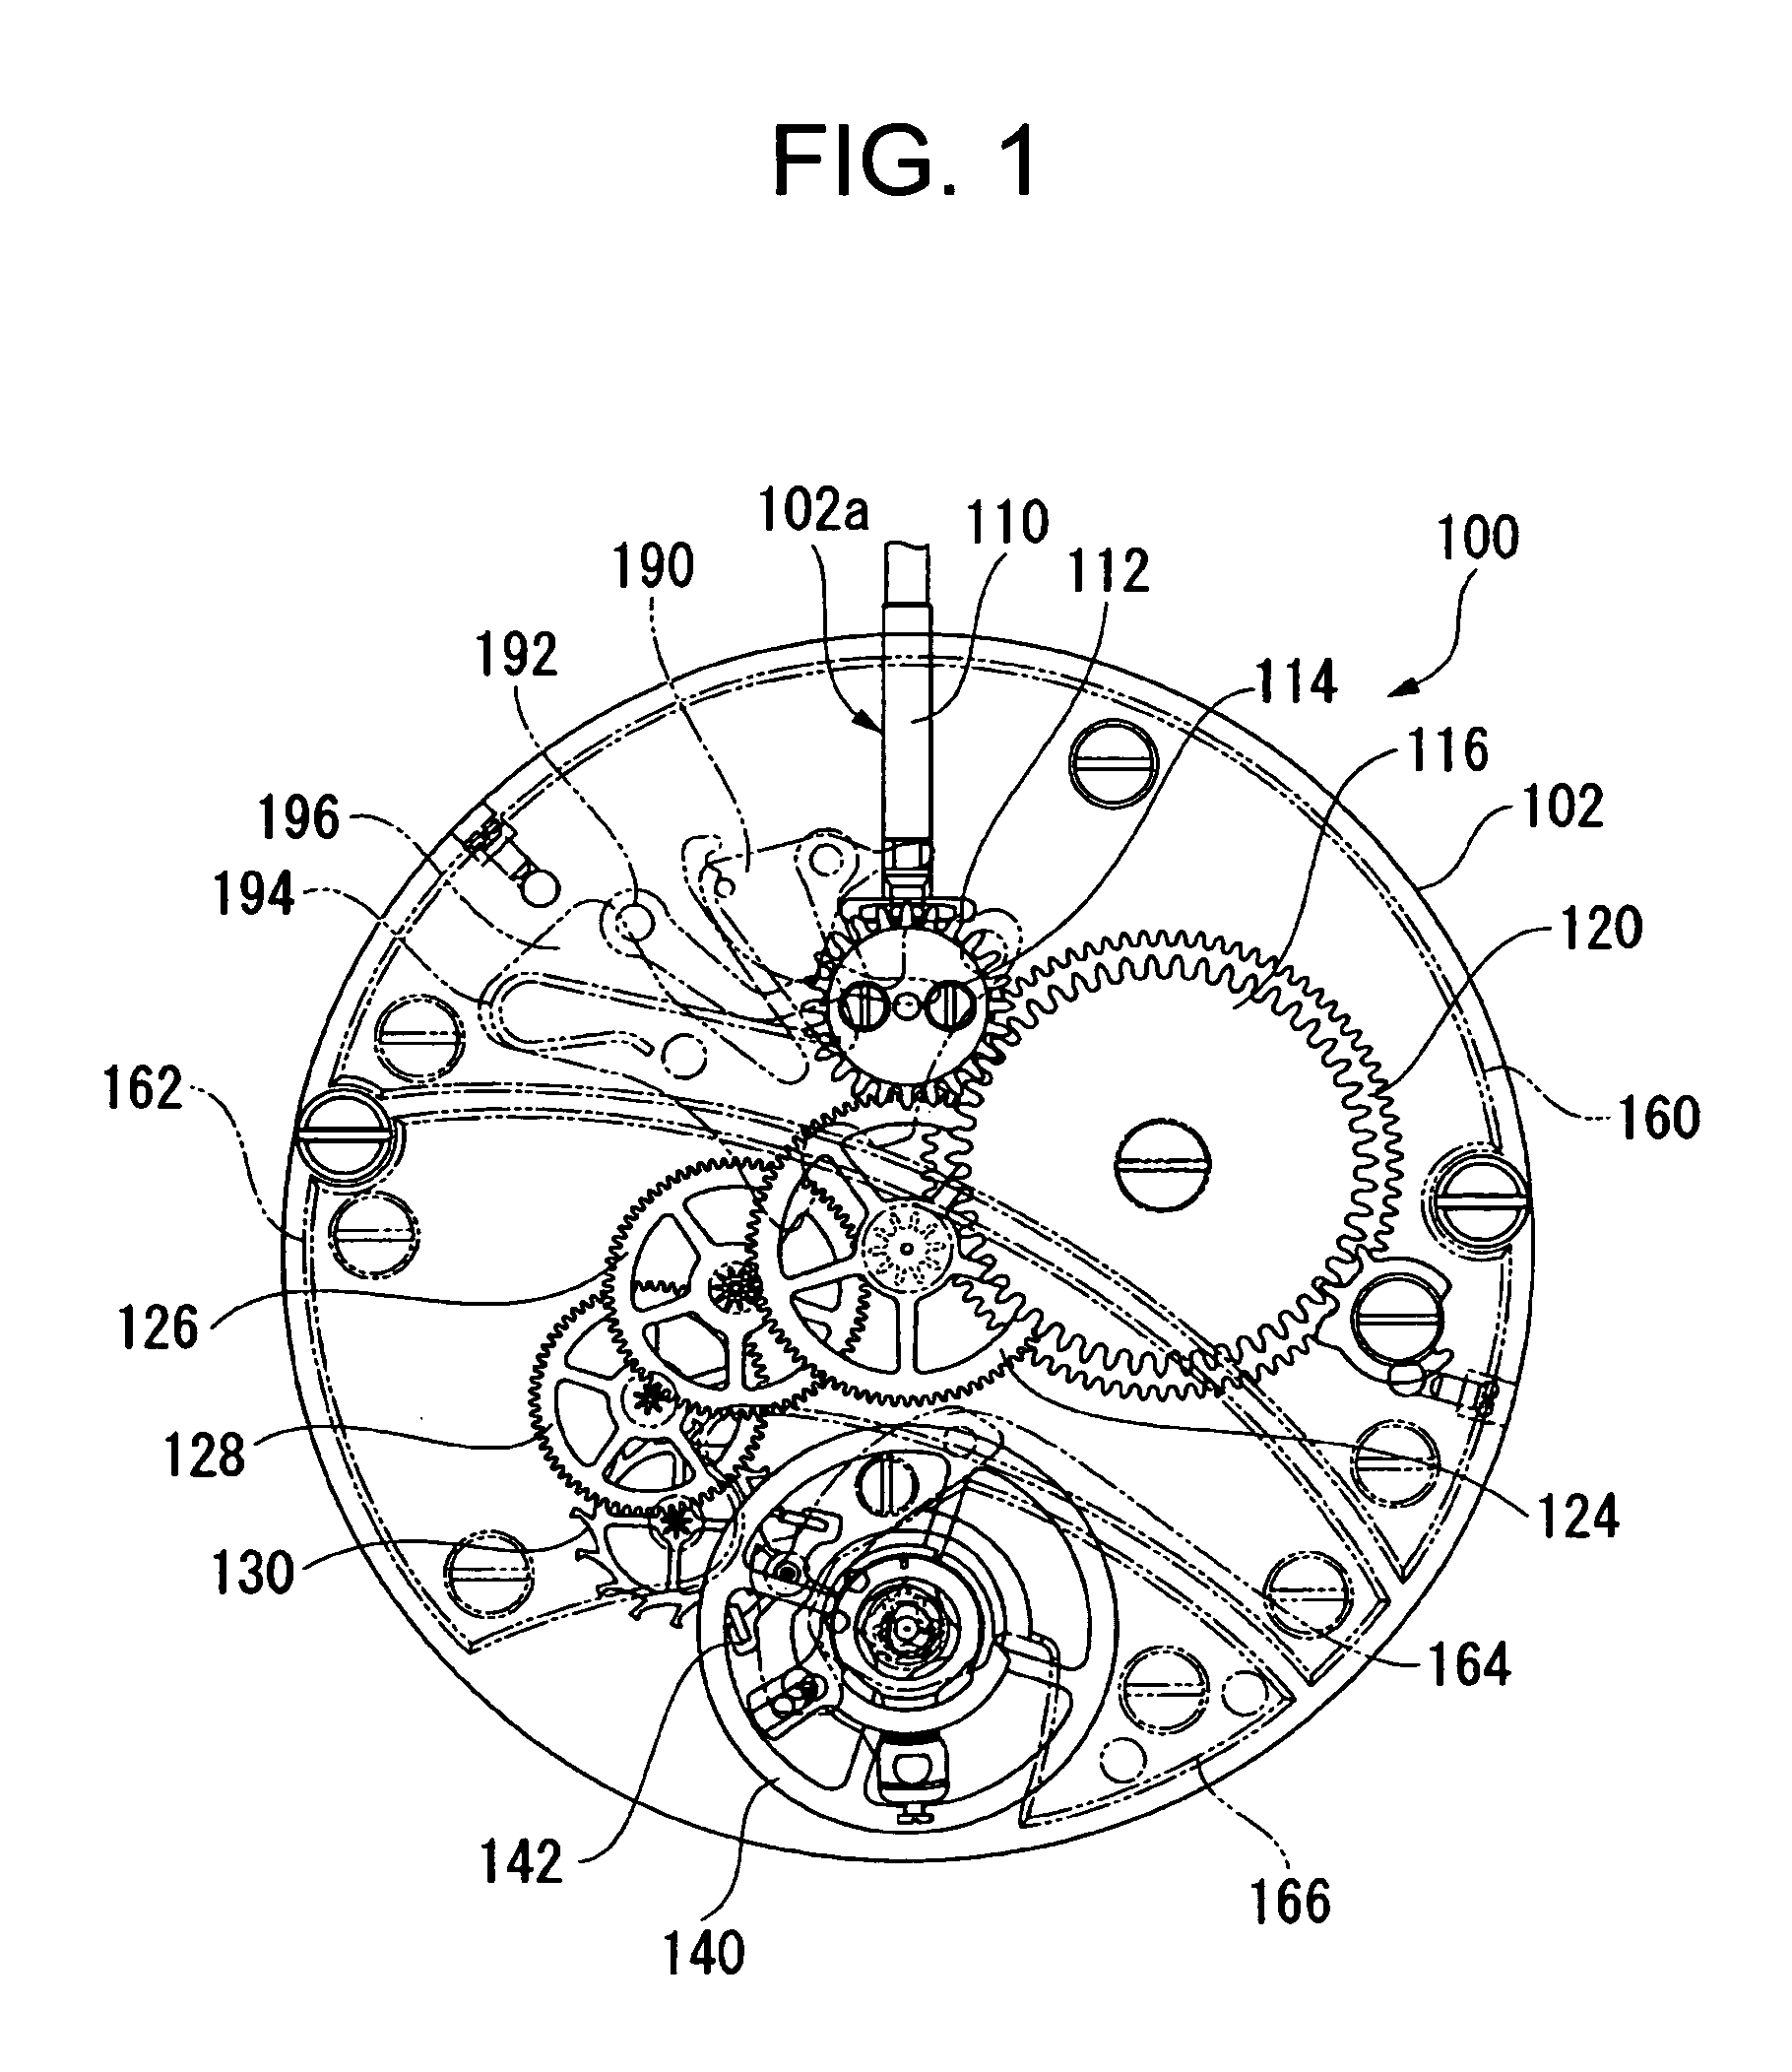 Timepiece bearing, movement, and portable timepiece